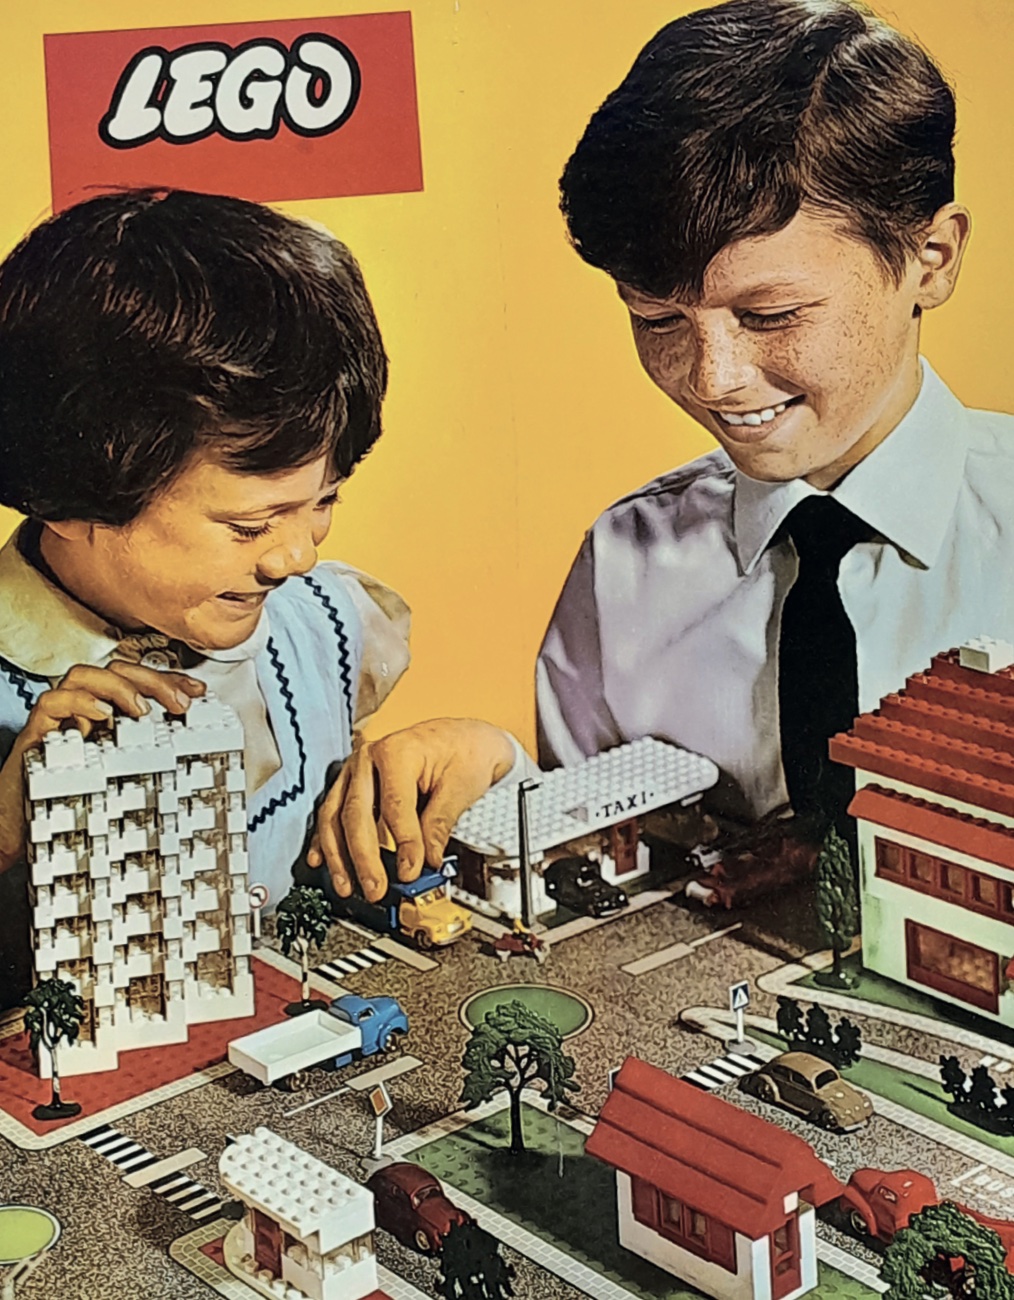 A vintage advert for Lego with two children playing